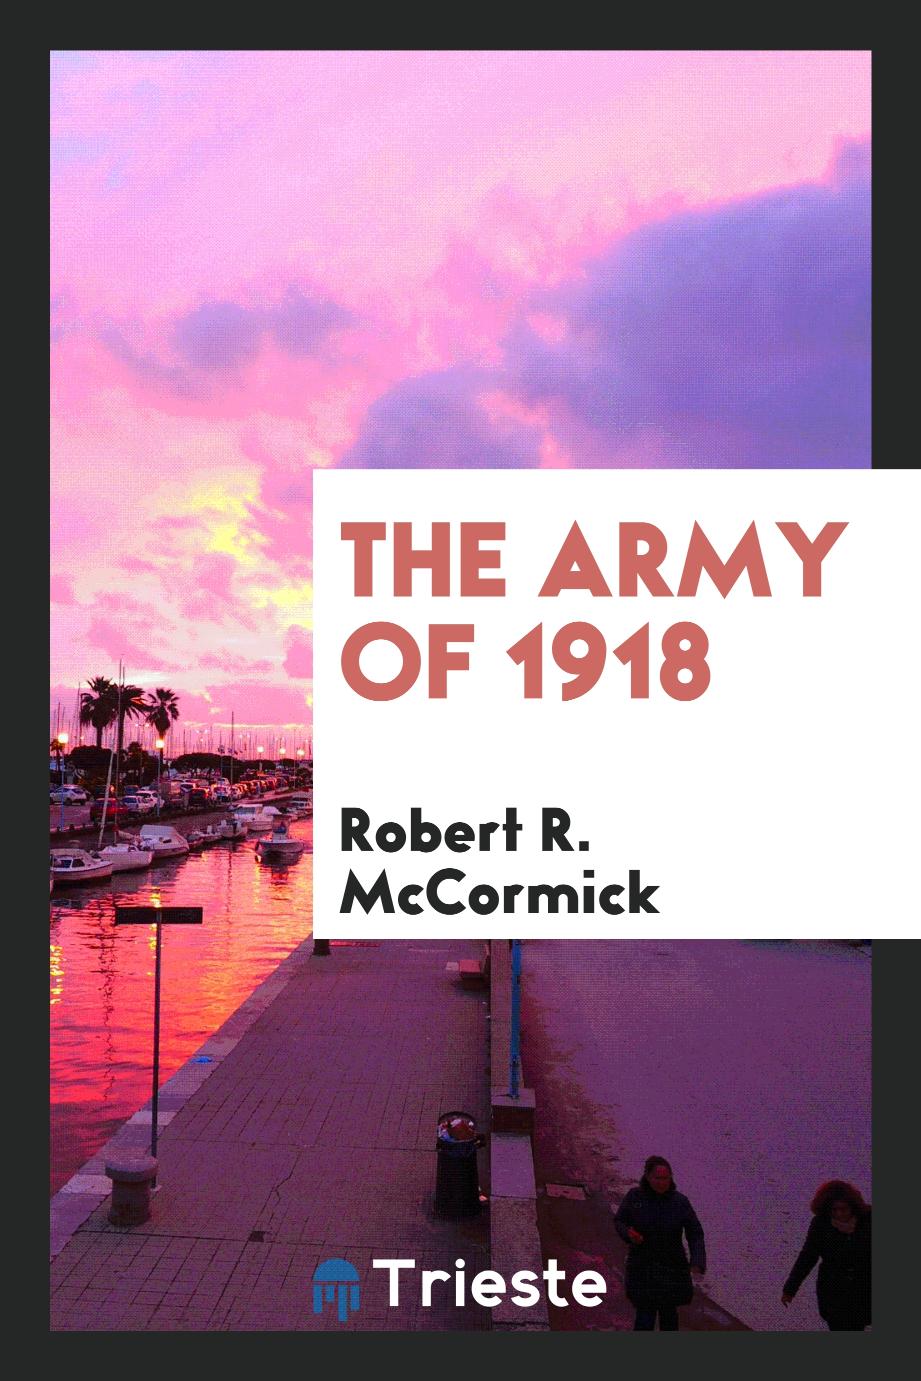 The army of 1918